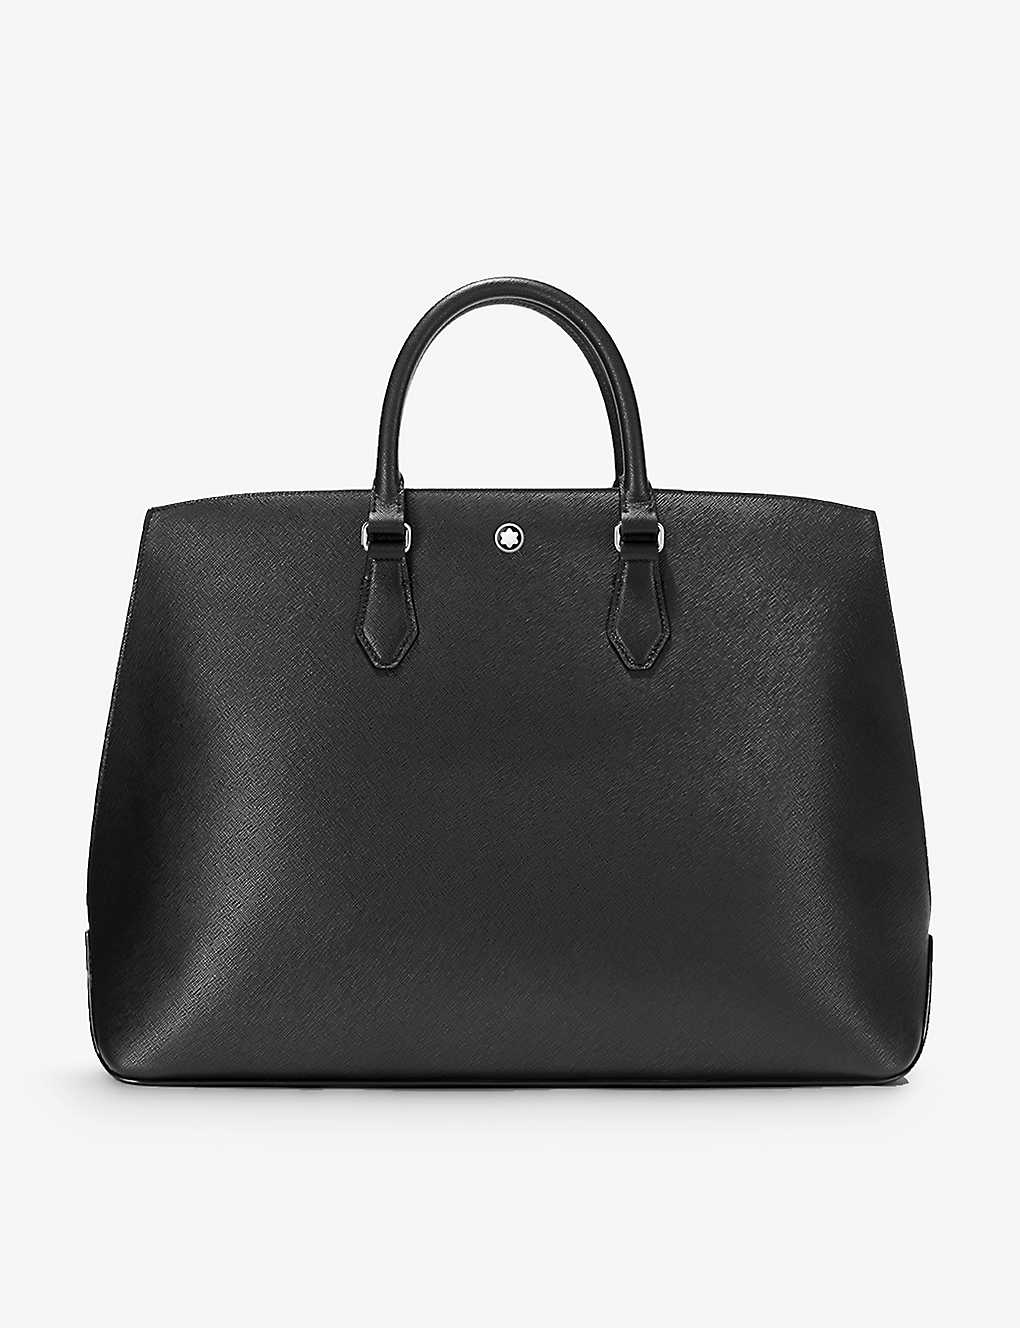 Montblanc Black Sartorial Grained-leather Tote Bag